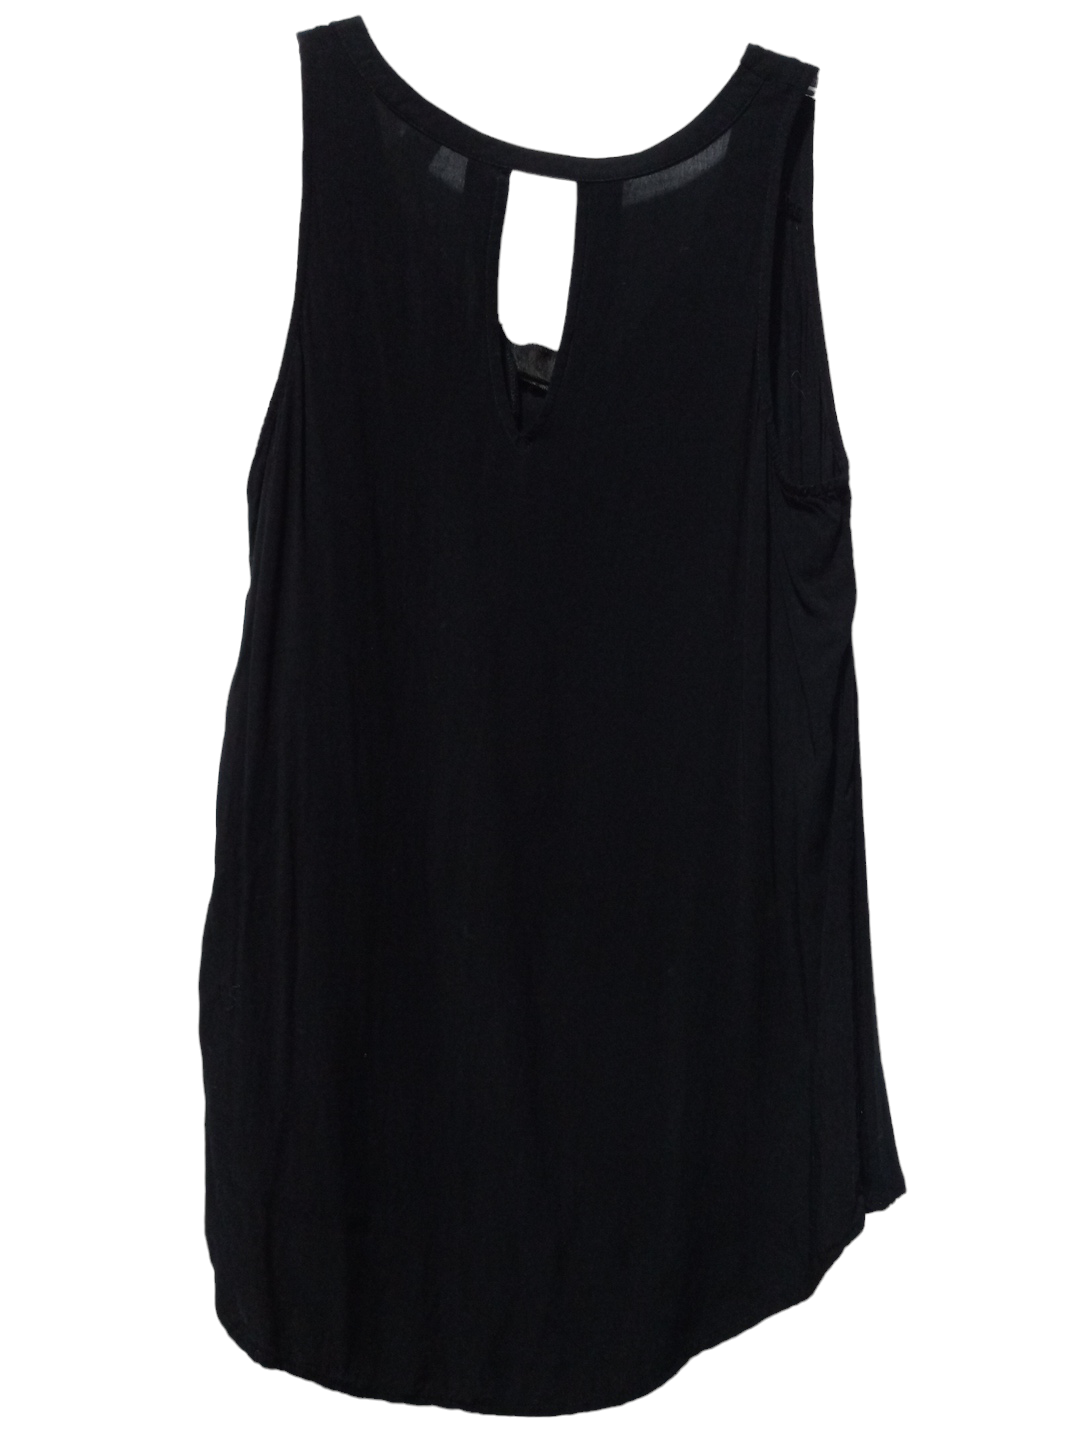 Black Top Sleeveless Old Navy, Size S